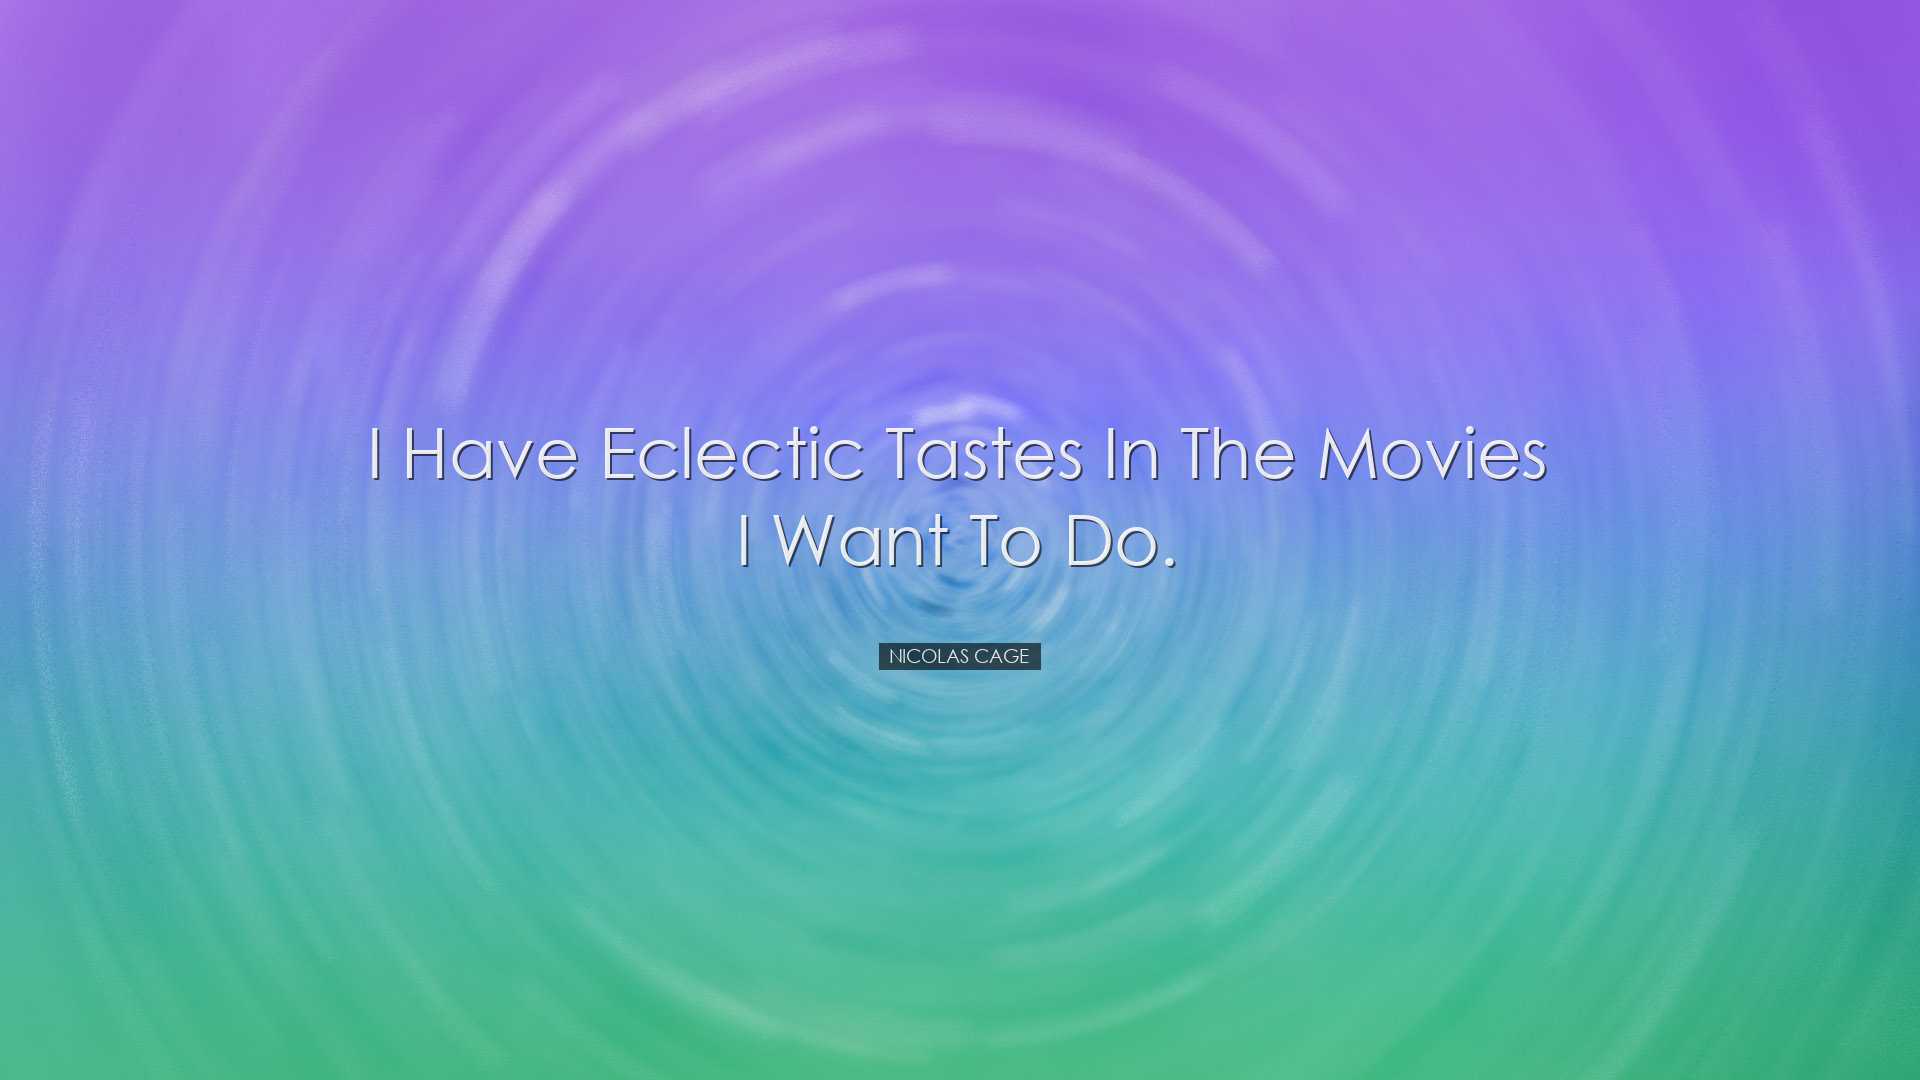 I have eclectic tastes in the movies I want to do. - Nicolas Cage